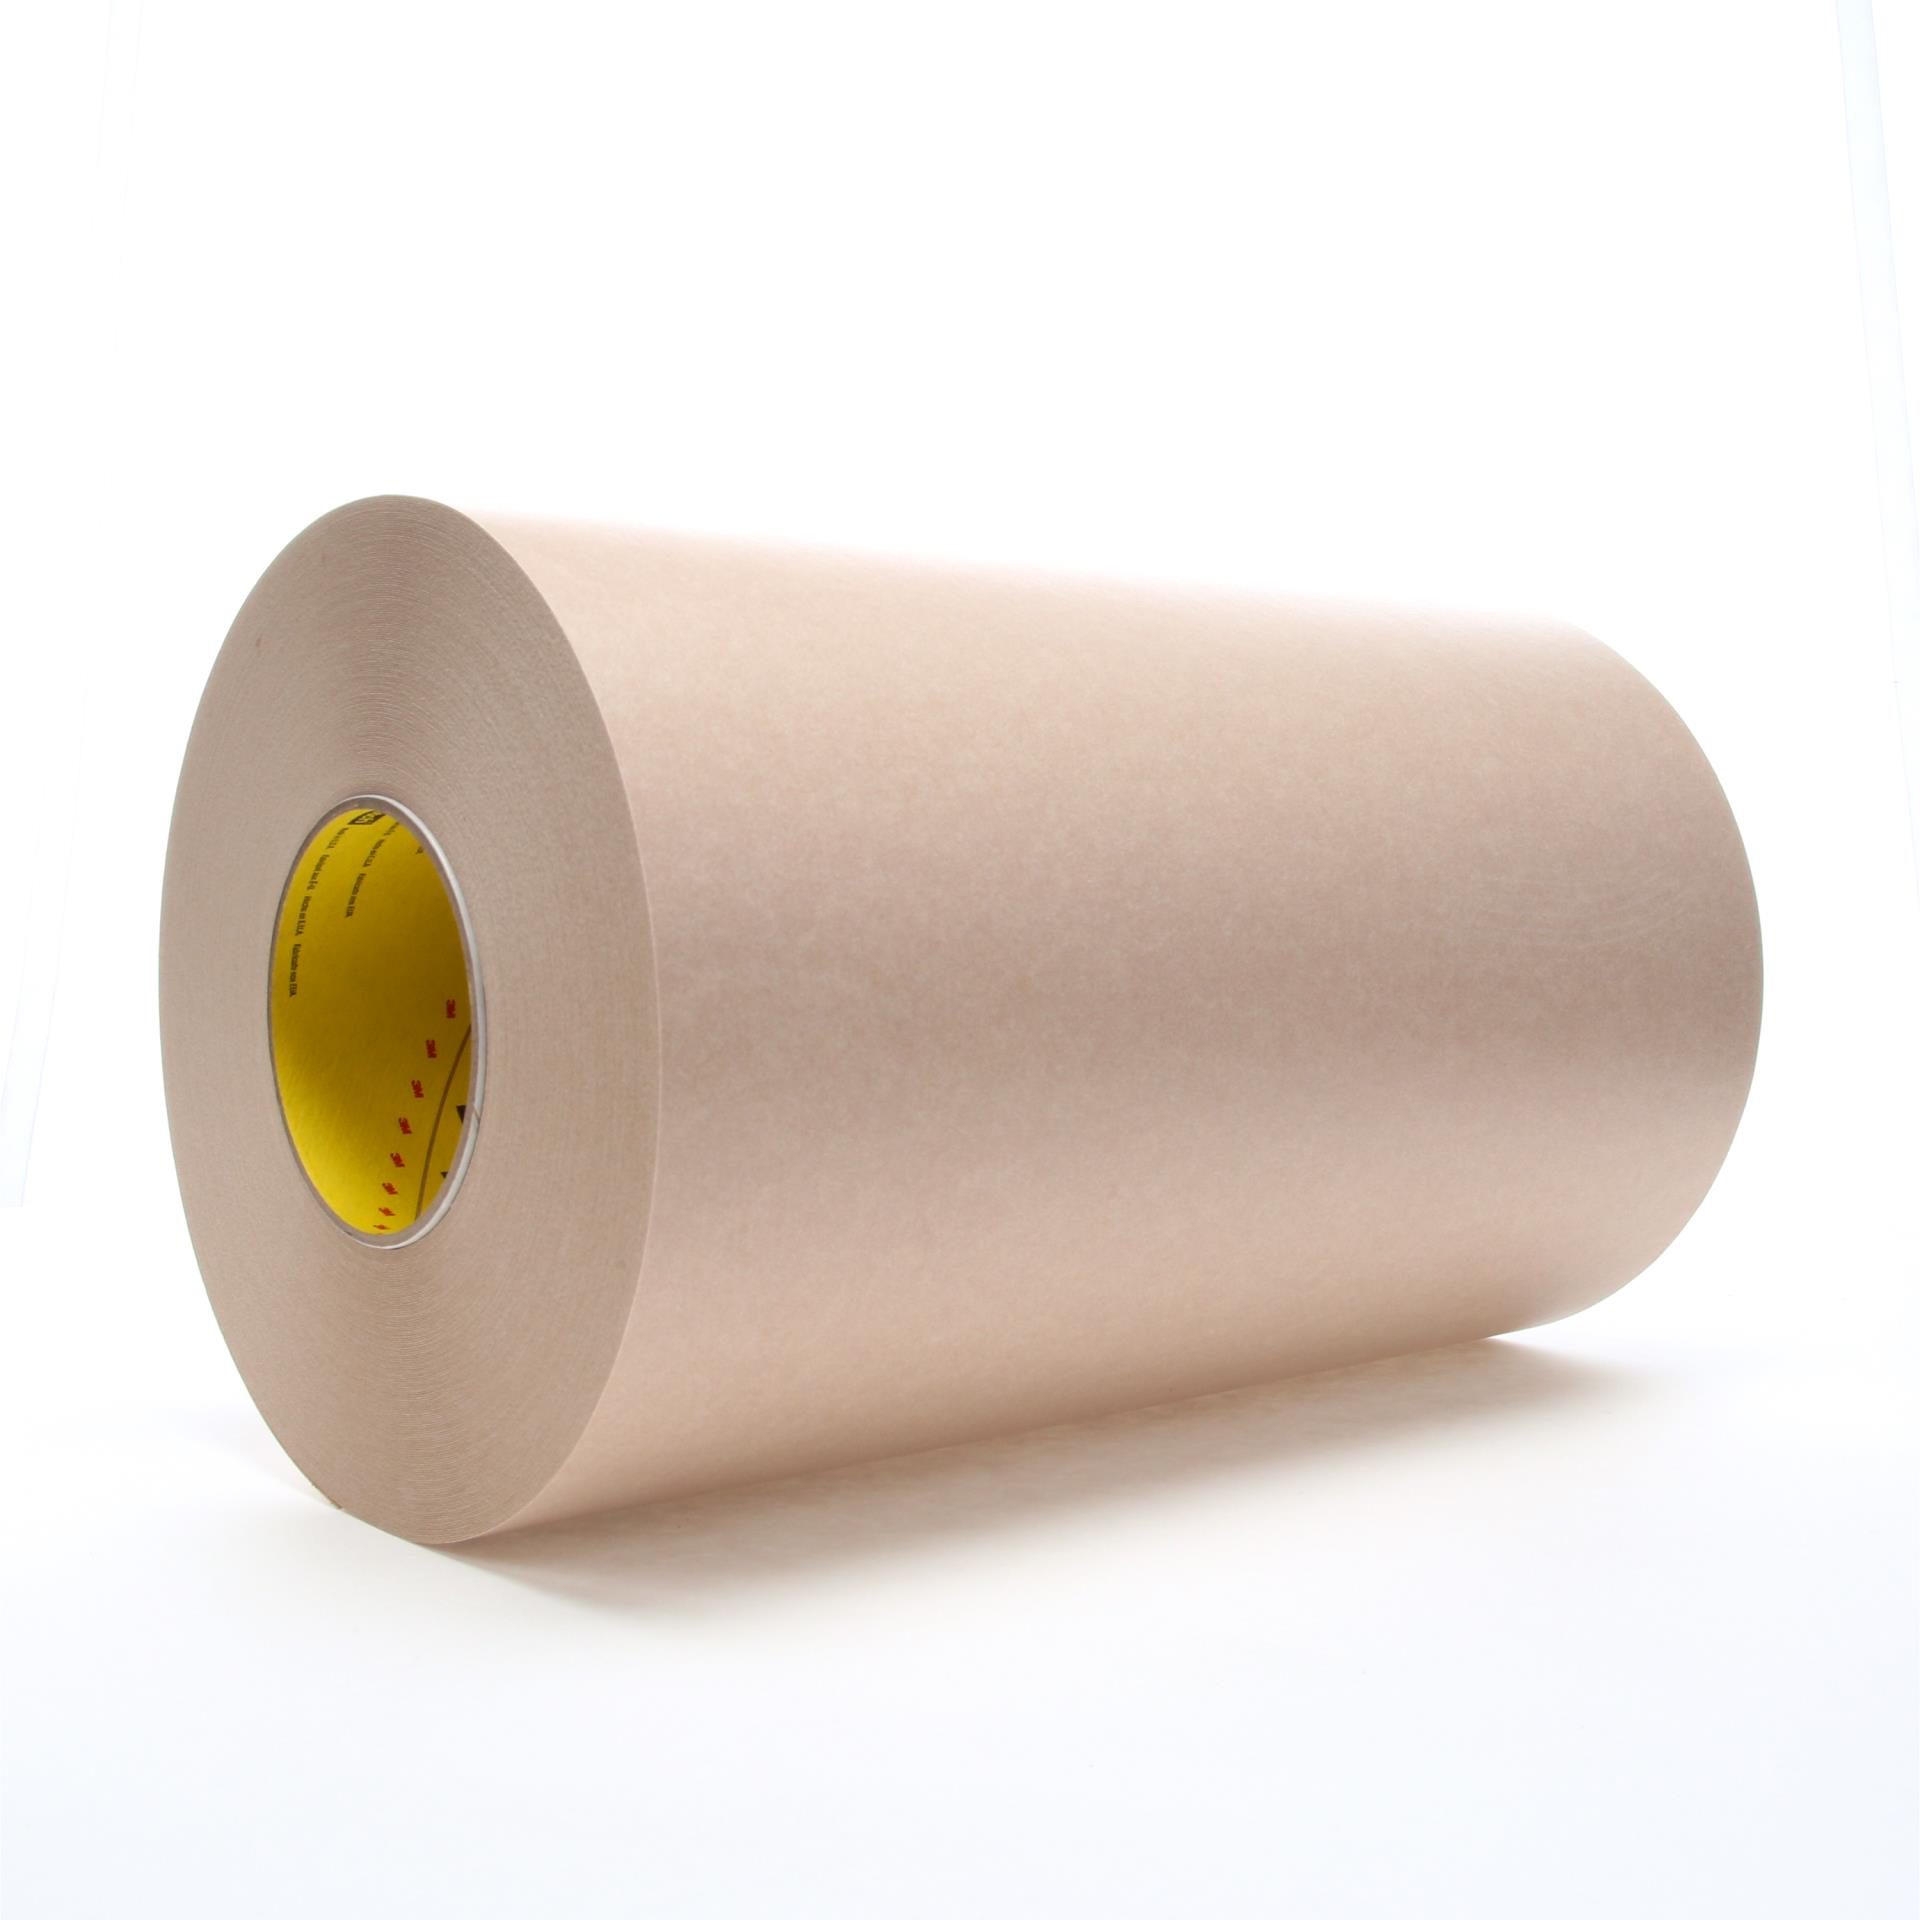 Double Stick Tape Paper Backing Natural Rubber/Resin Adhesive 33 Yard  Roll18 mm x 33 m / 2